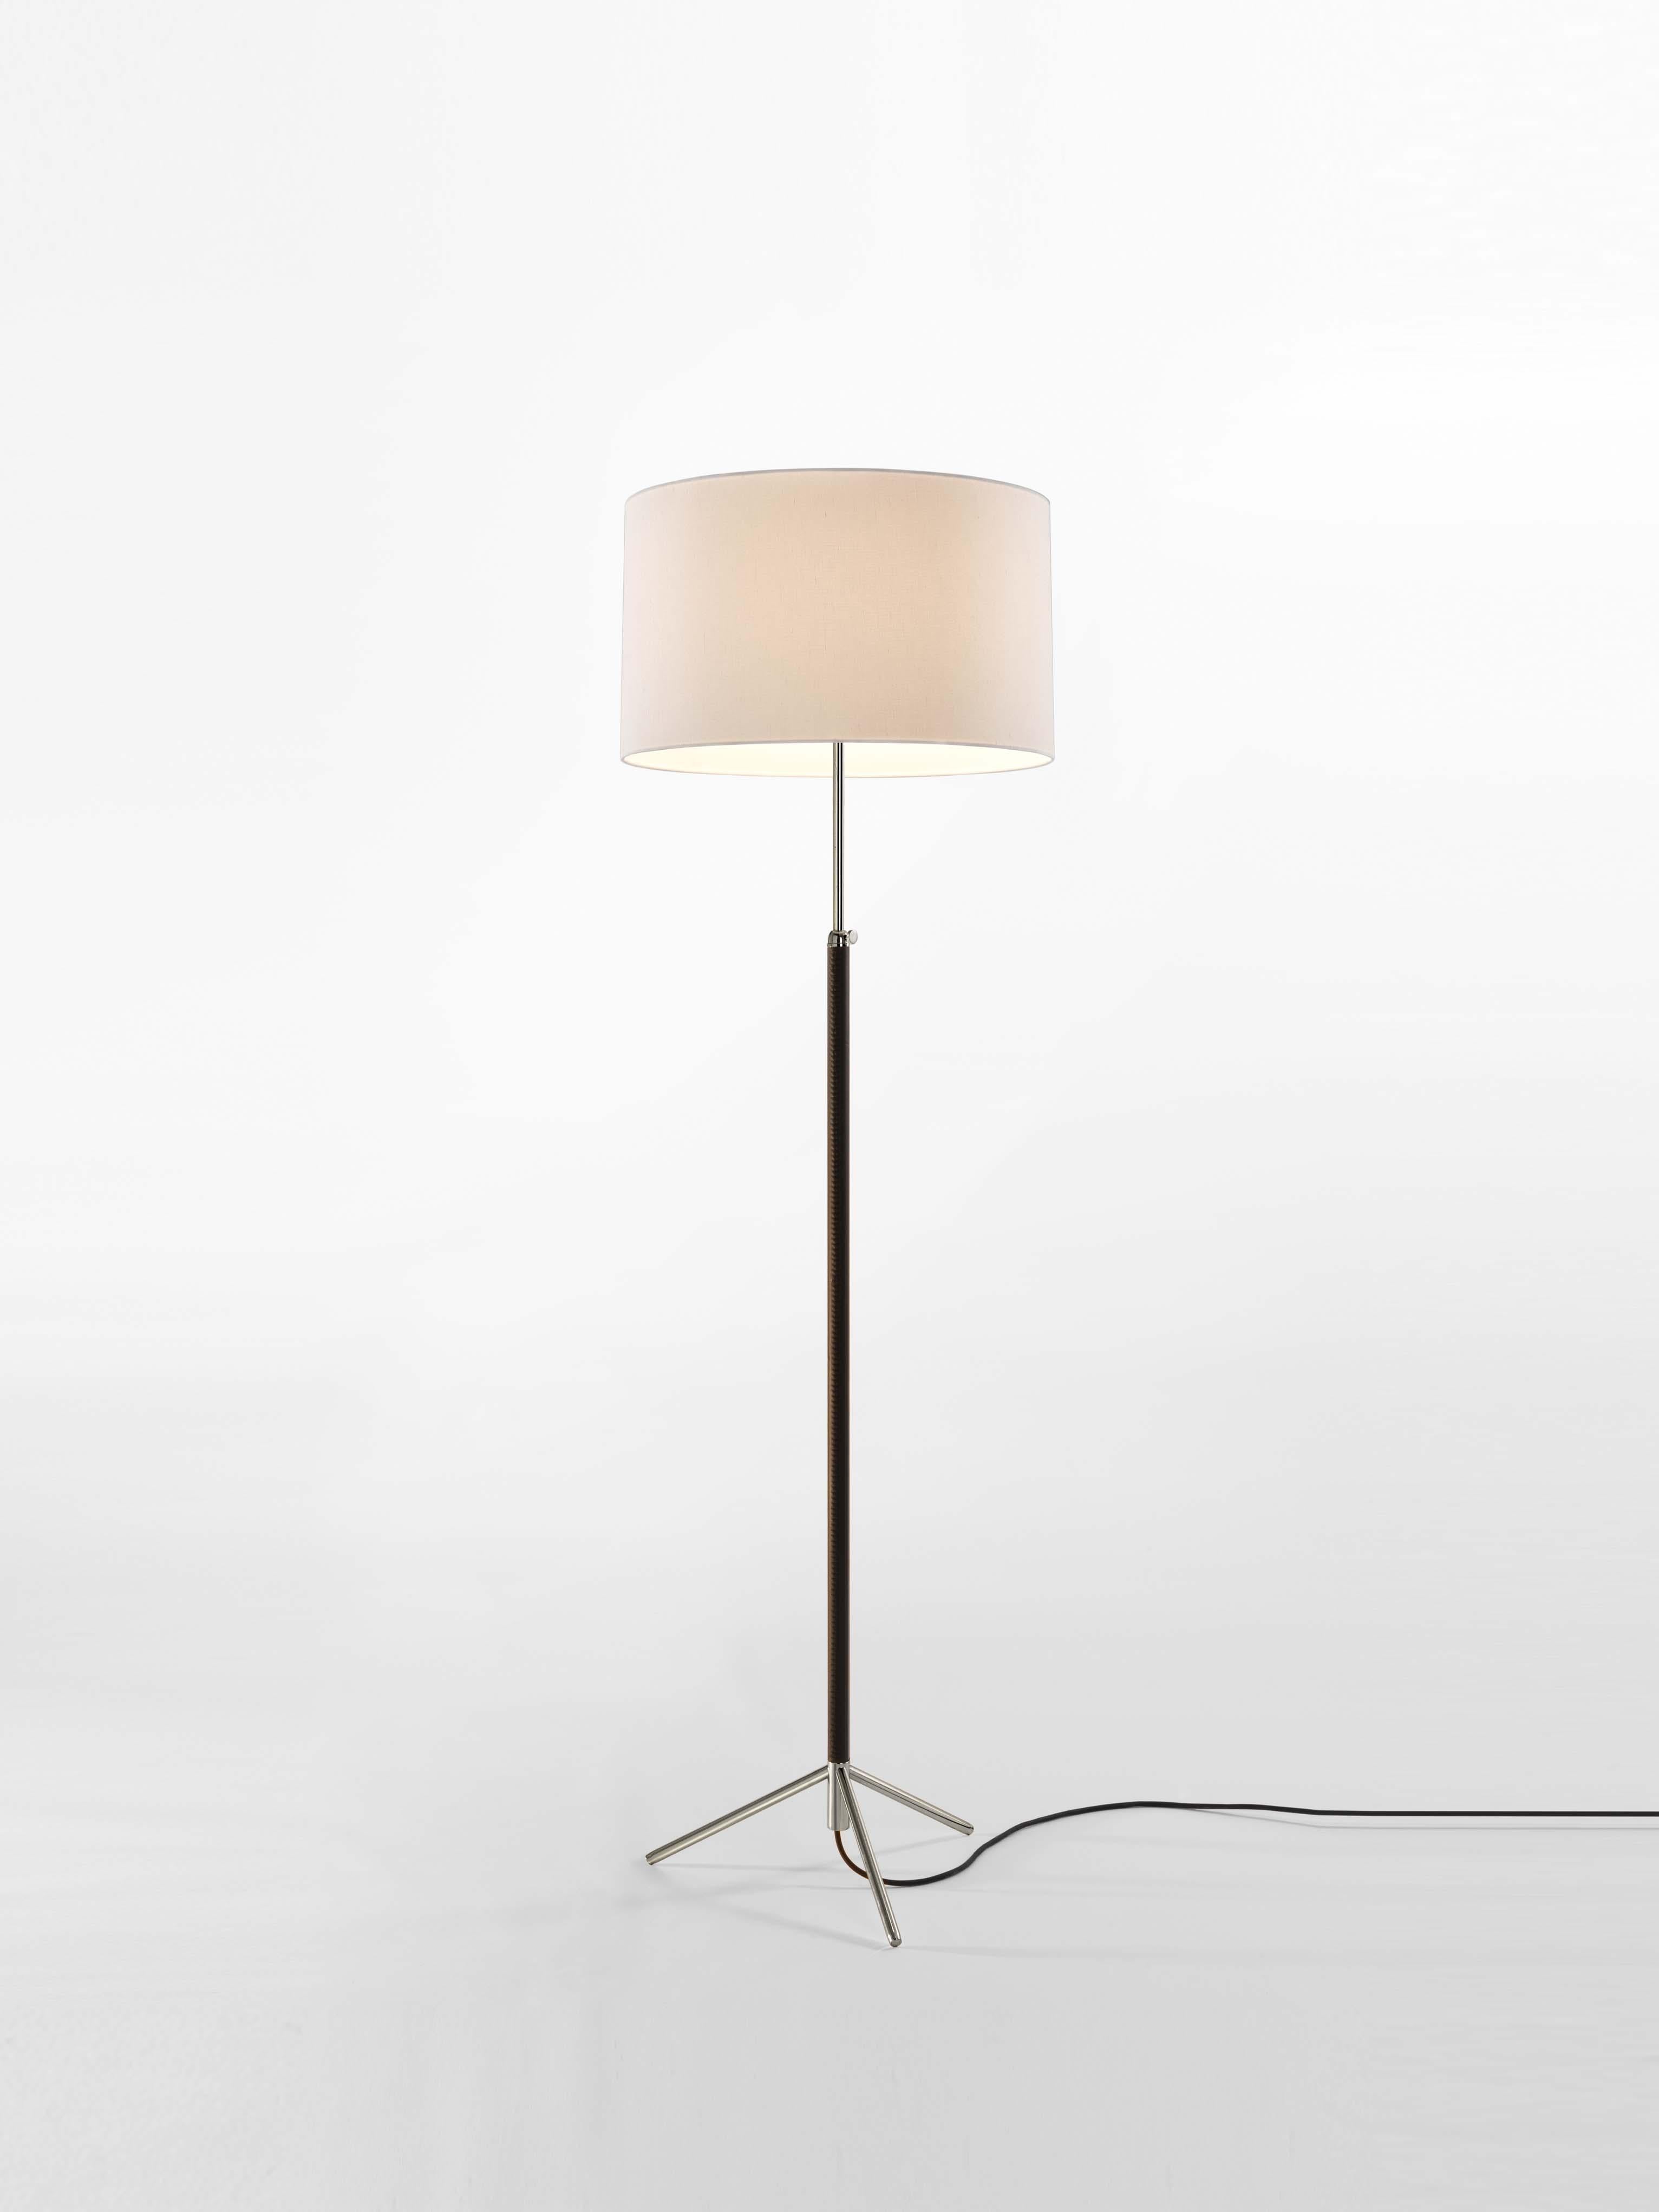 White and chrome Pie de Salón G2 floor lamp by Jaume Sans
Dimensions: D 45 x H 120-160 cm
Materials: Metal, leather, linen.
Available in chrome-plated or polished brass structure.
Available in other shade colors and sizes.

This slender